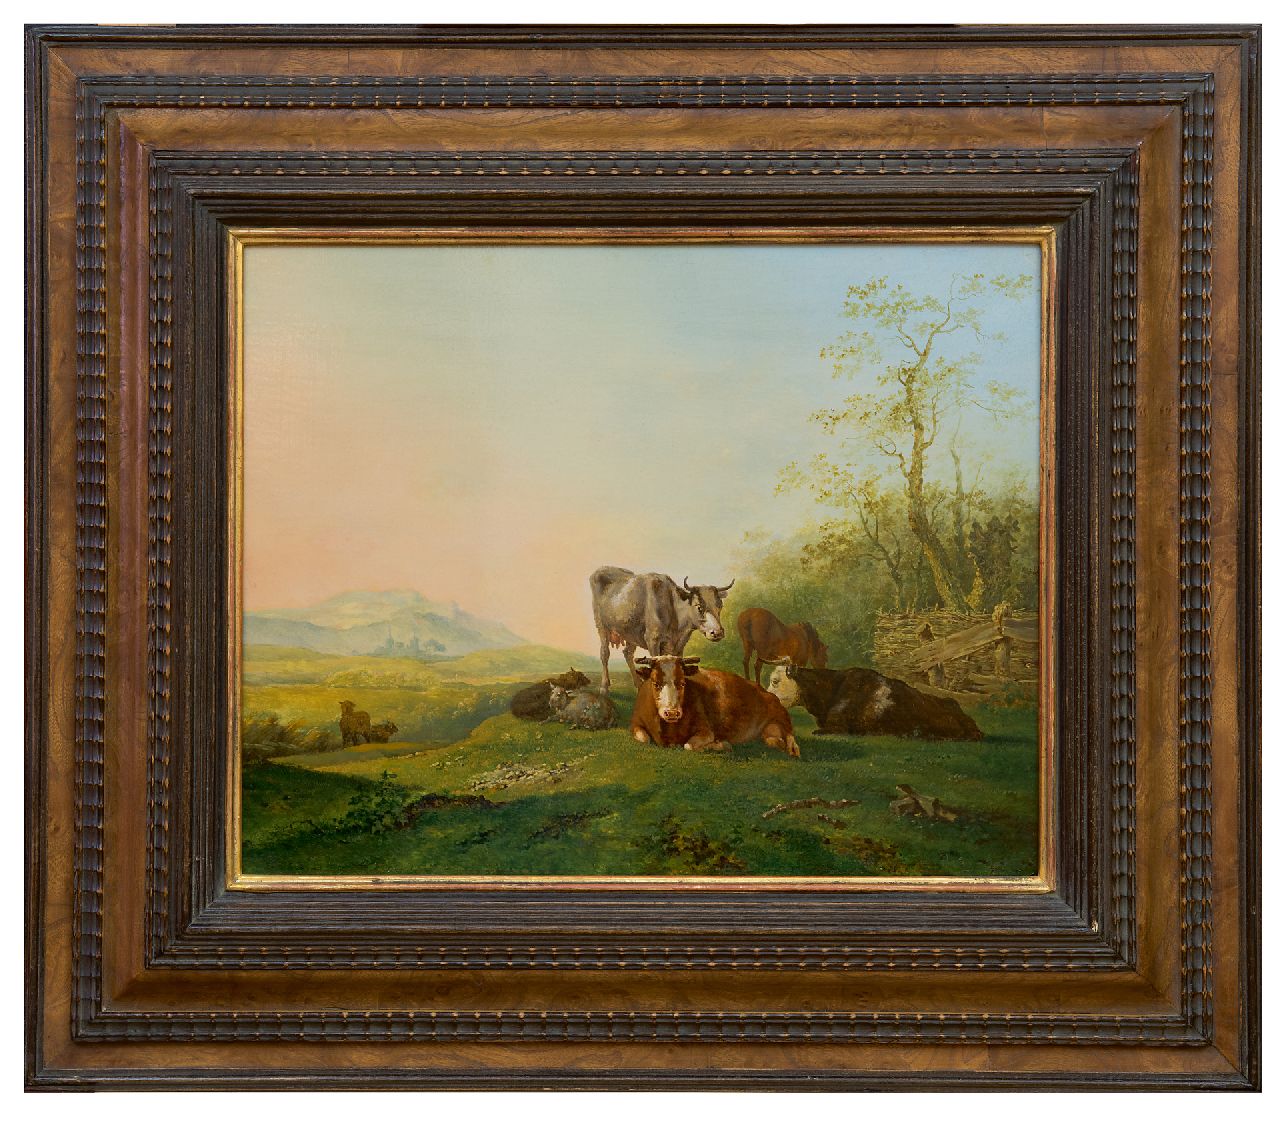 Straaten B. van | Bruno van Straaten | Paintings offered for sale | Cows and sheep near a fence, oil on panel 29.7 x 36.9 cm, signed l.r. and without frame